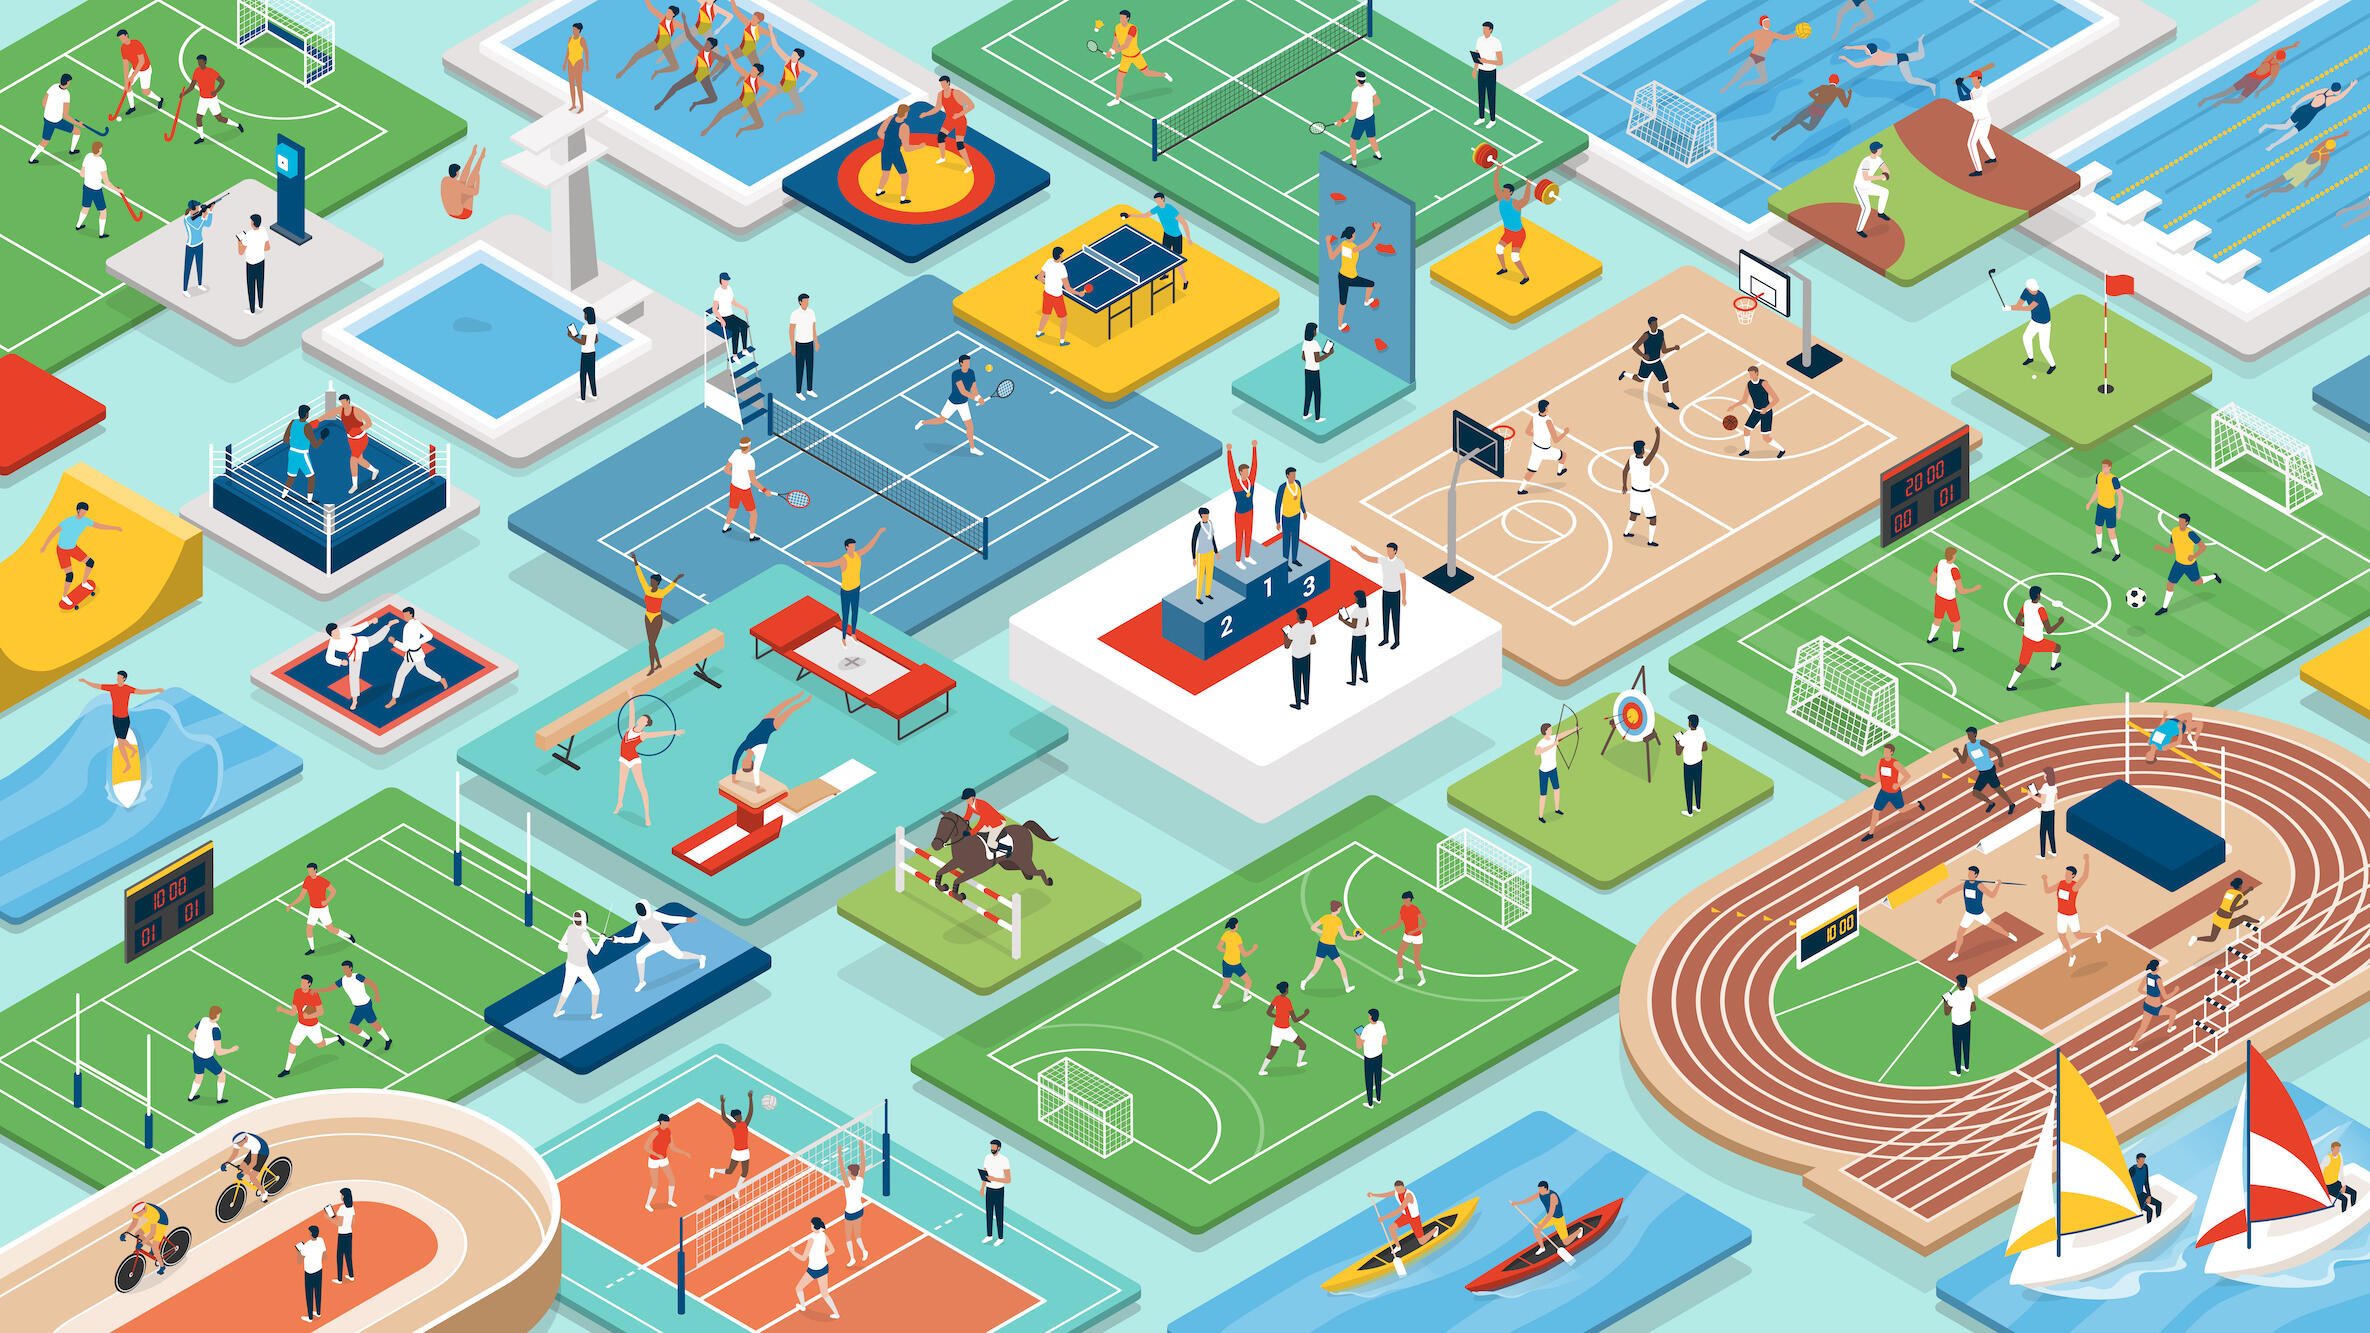 conceptual illustration of olympic sports, with tiles arranged on a board and athletes competing in events on each tile